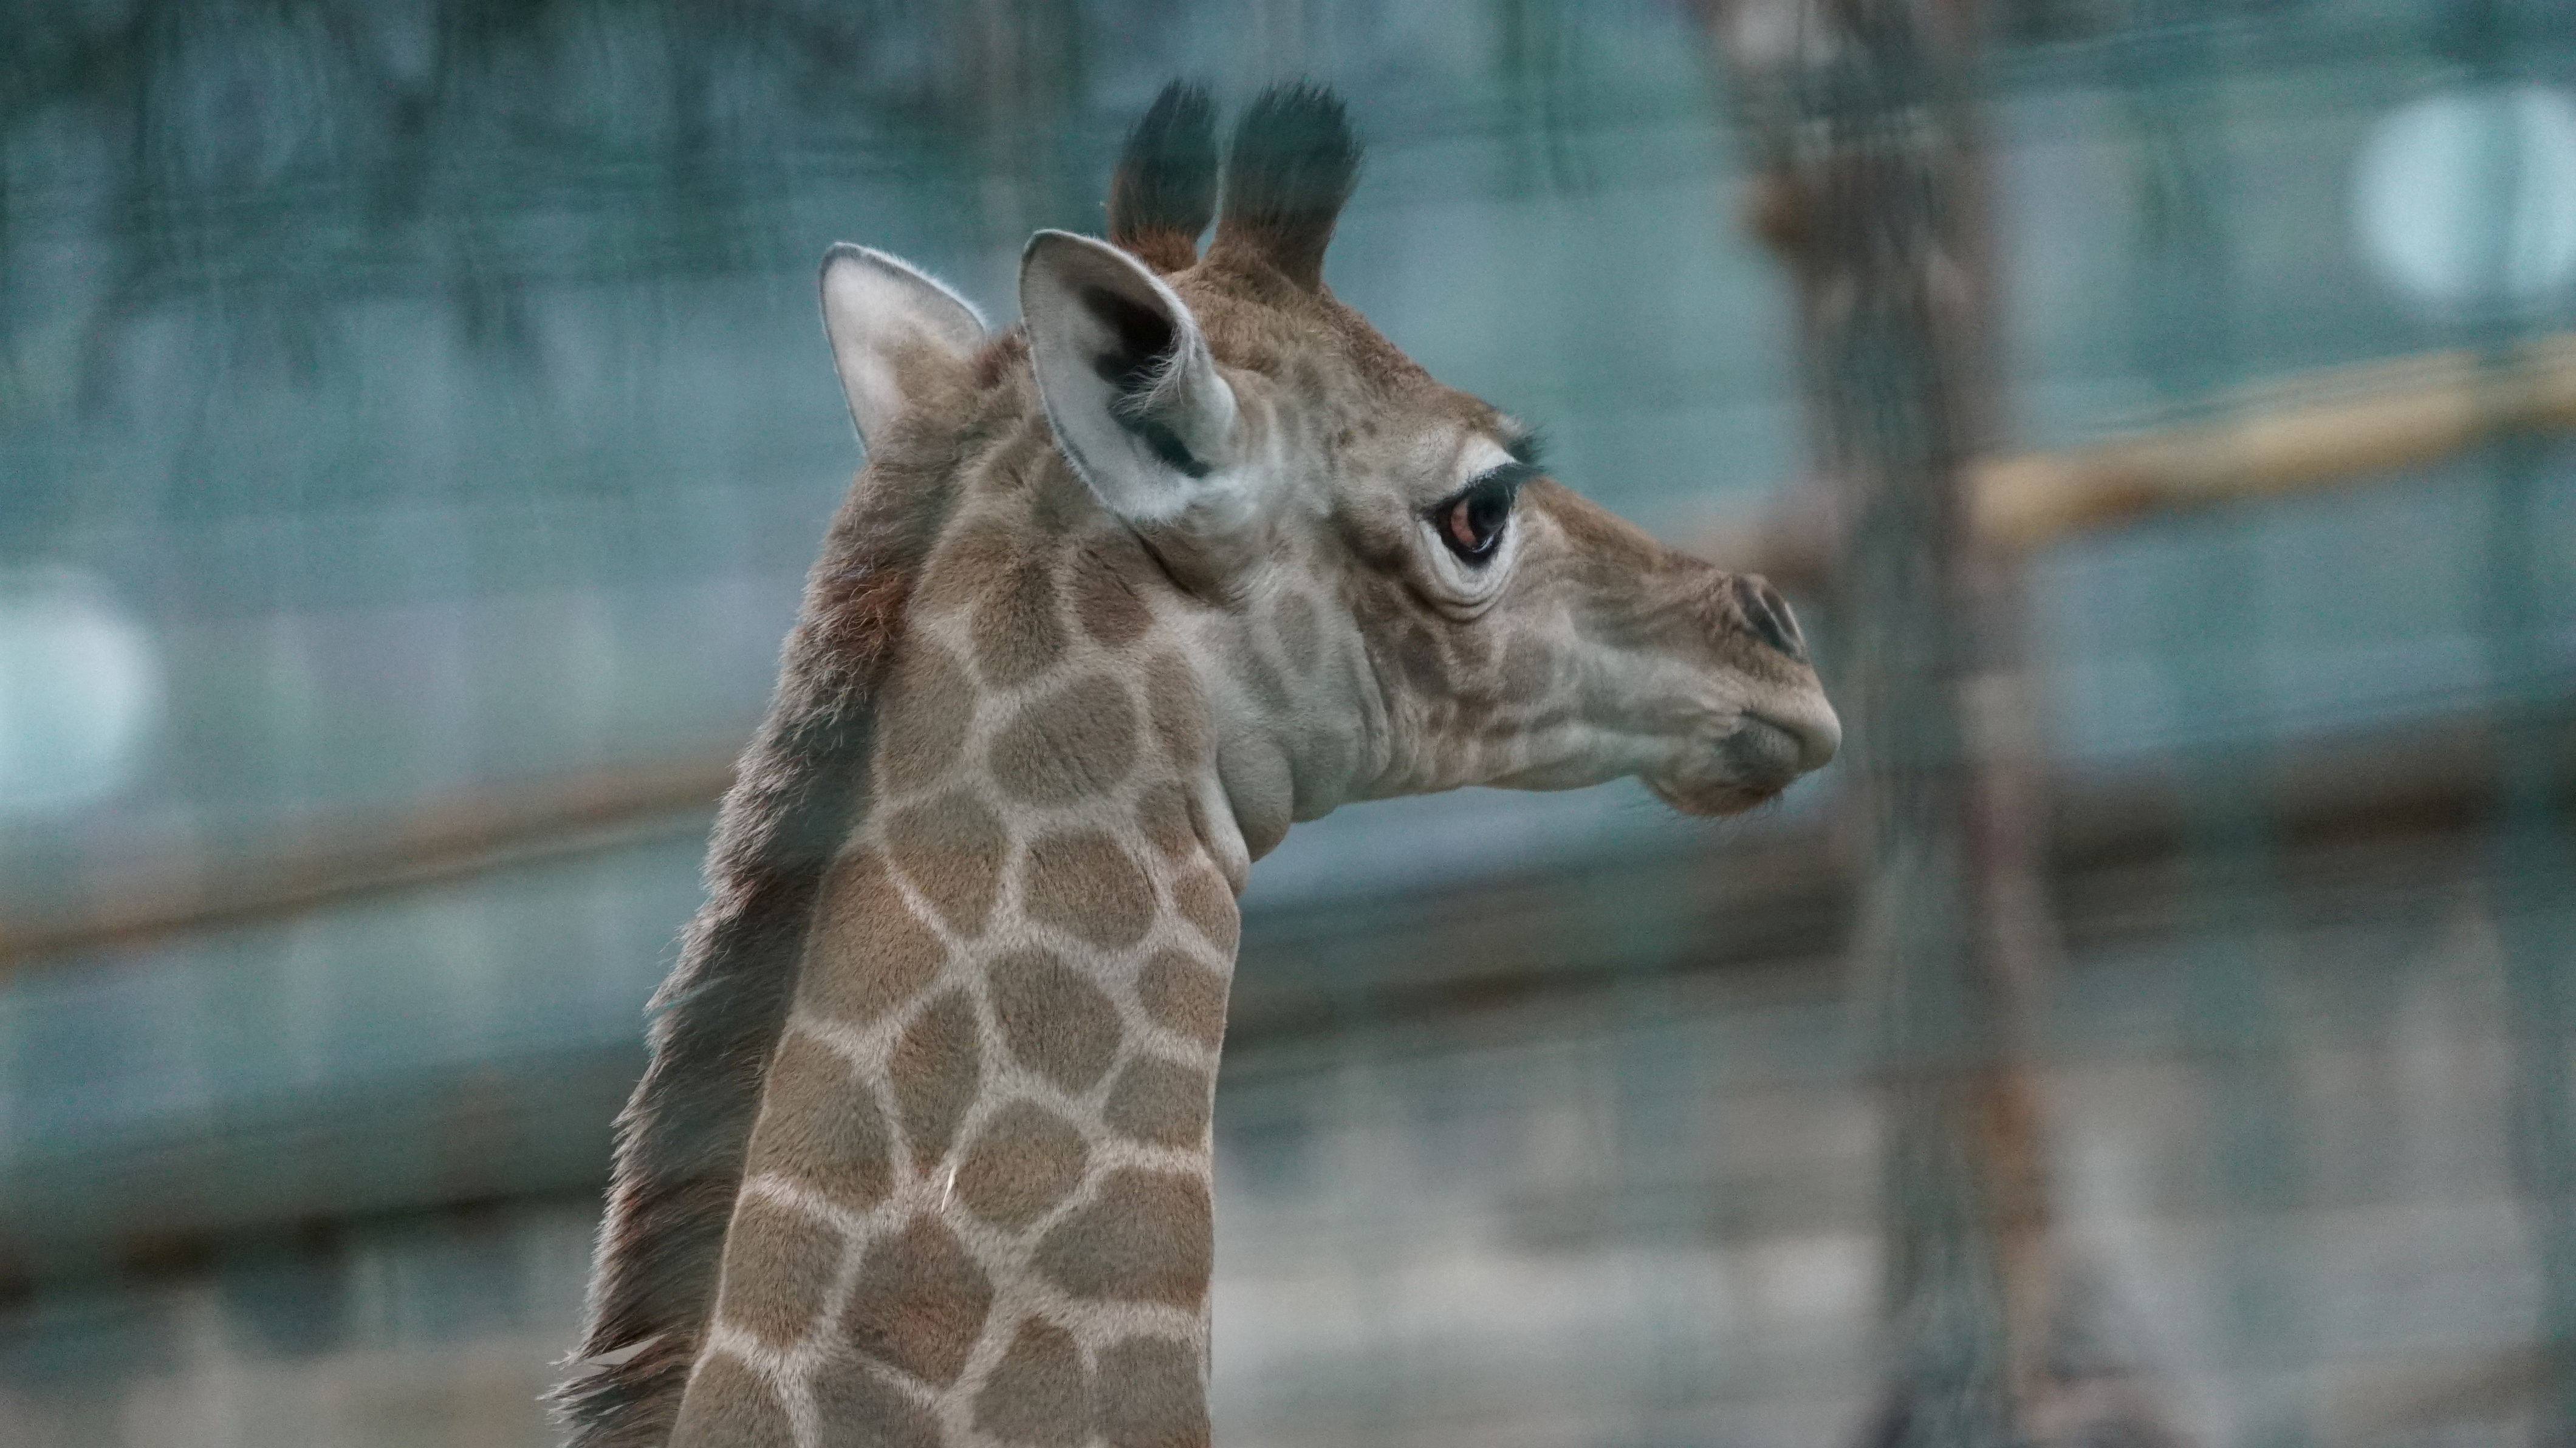 A baby giraffe, which was born in captivity, is displayed in its enclosure for the first time to the public, at the metropolitan park Zoo in Santiago